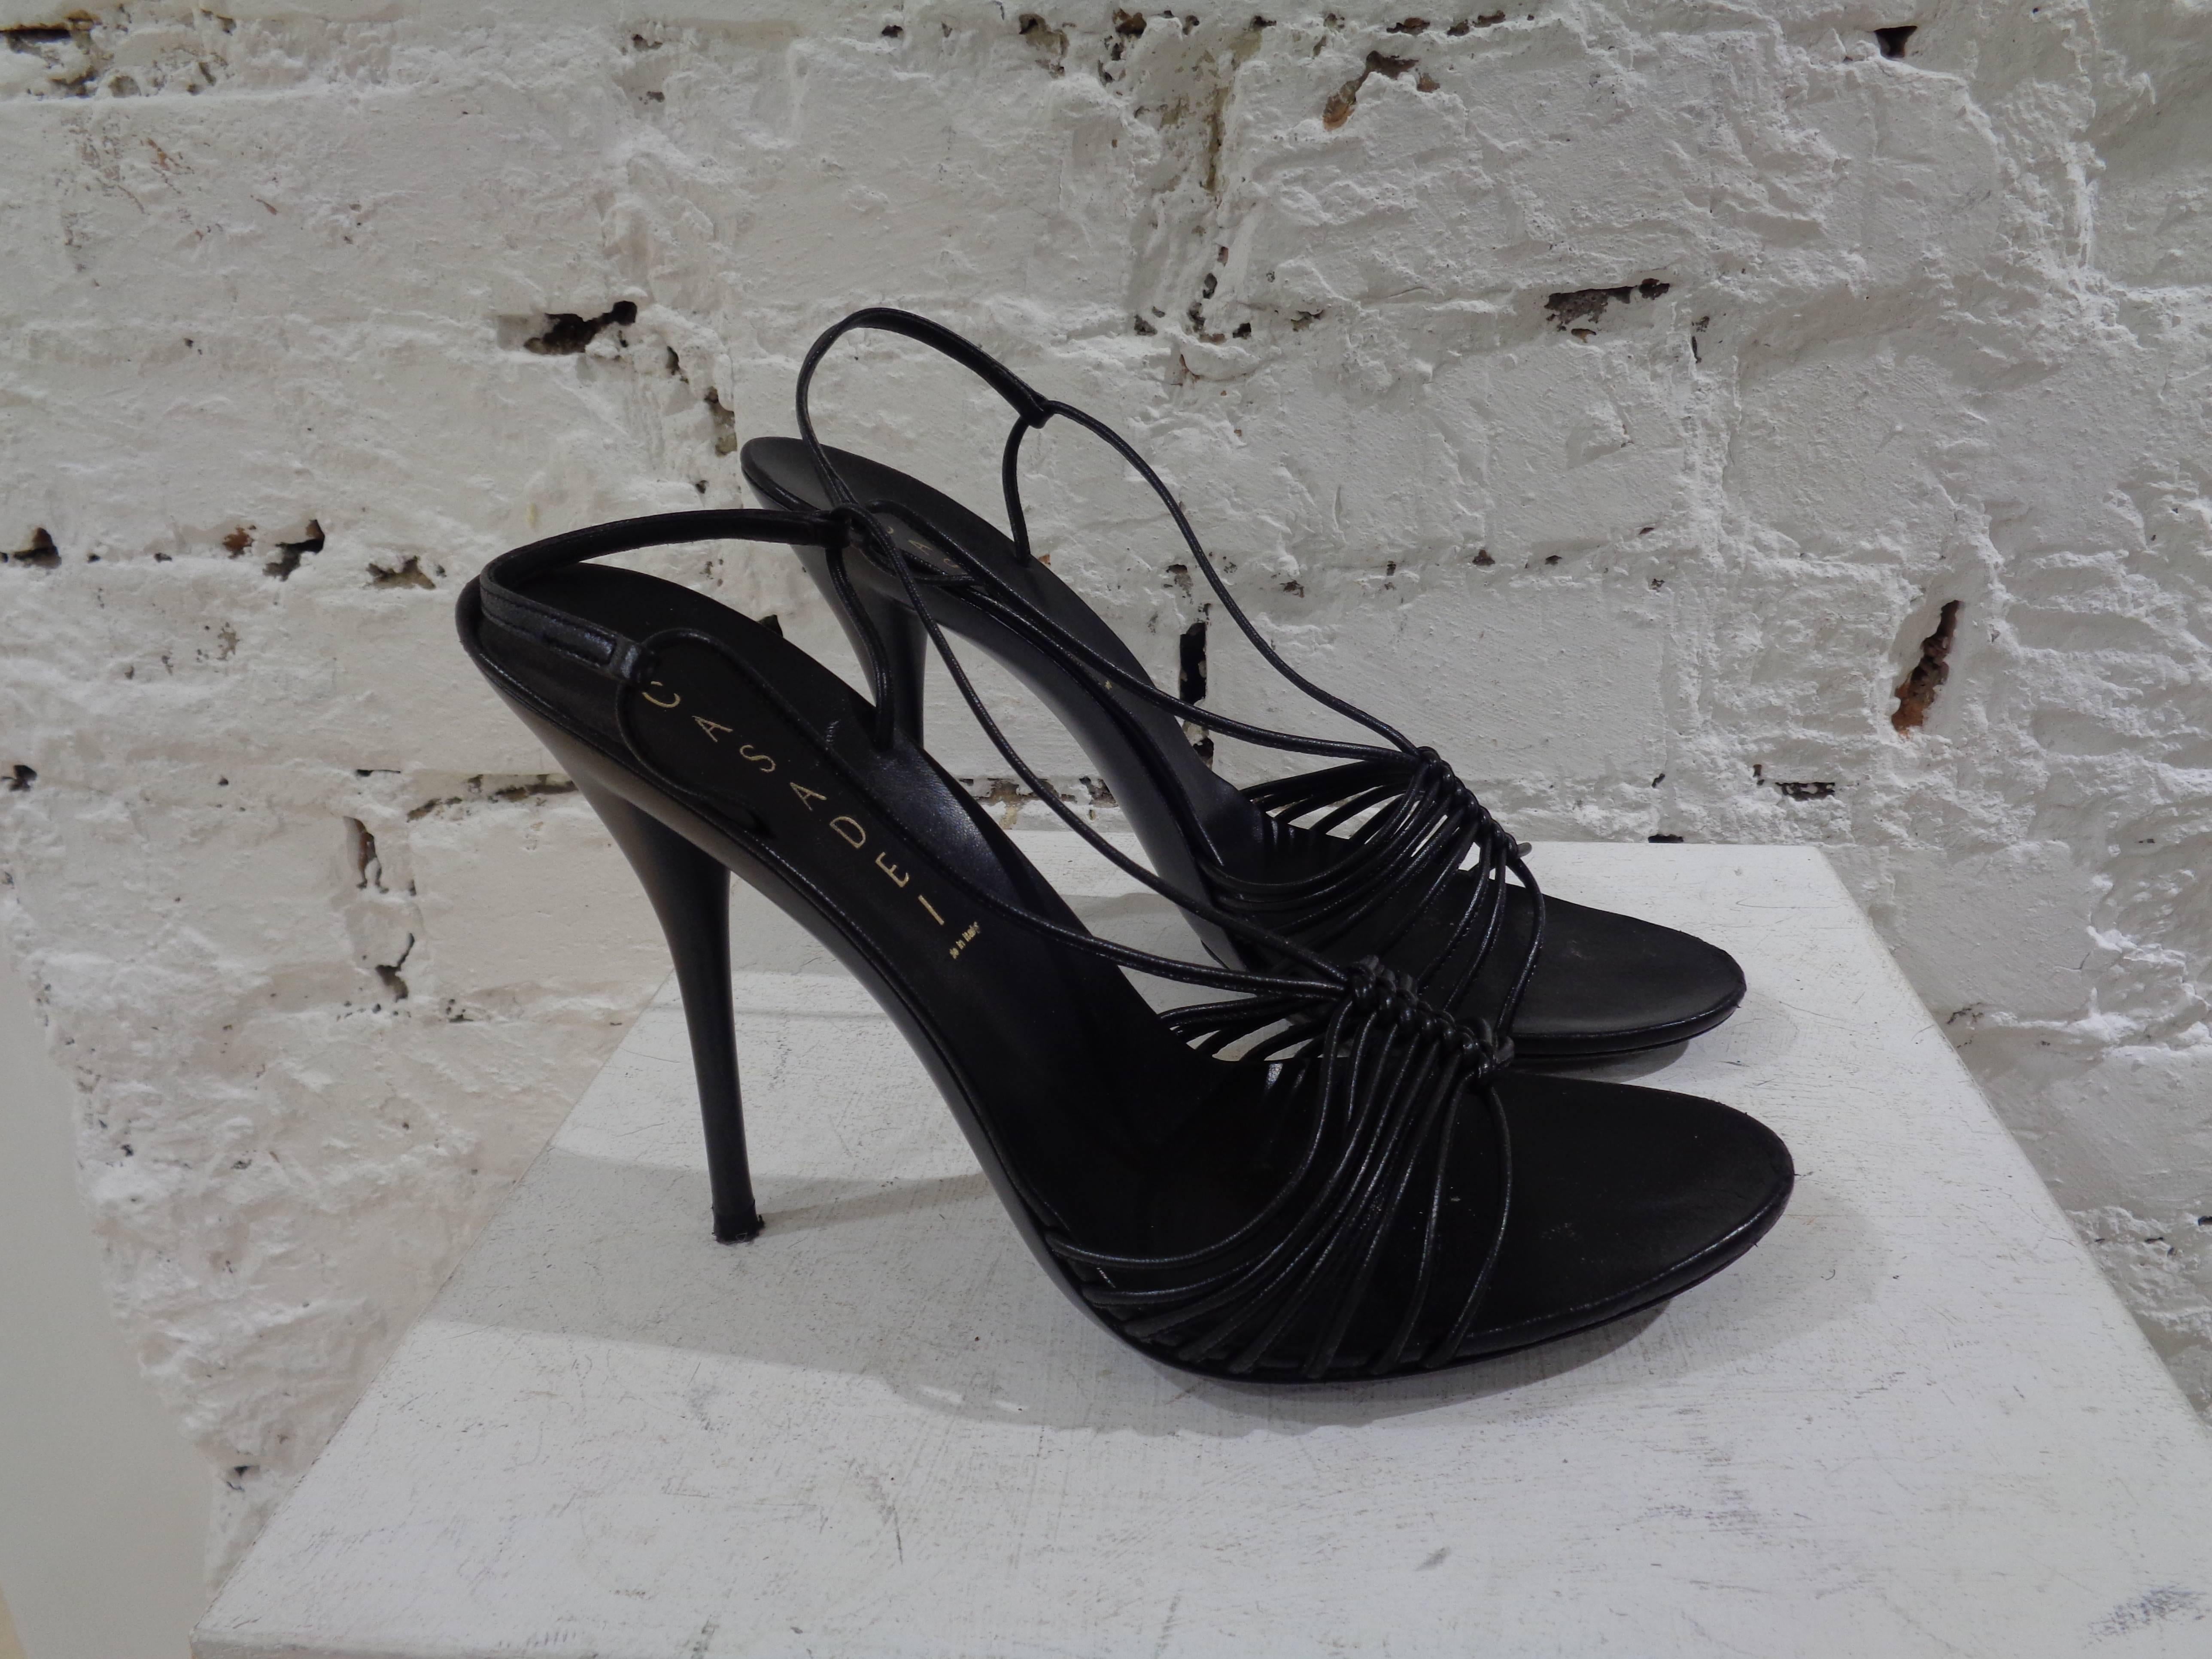 Casadei black leather sandals

totally made in italy

in size 40

unworn